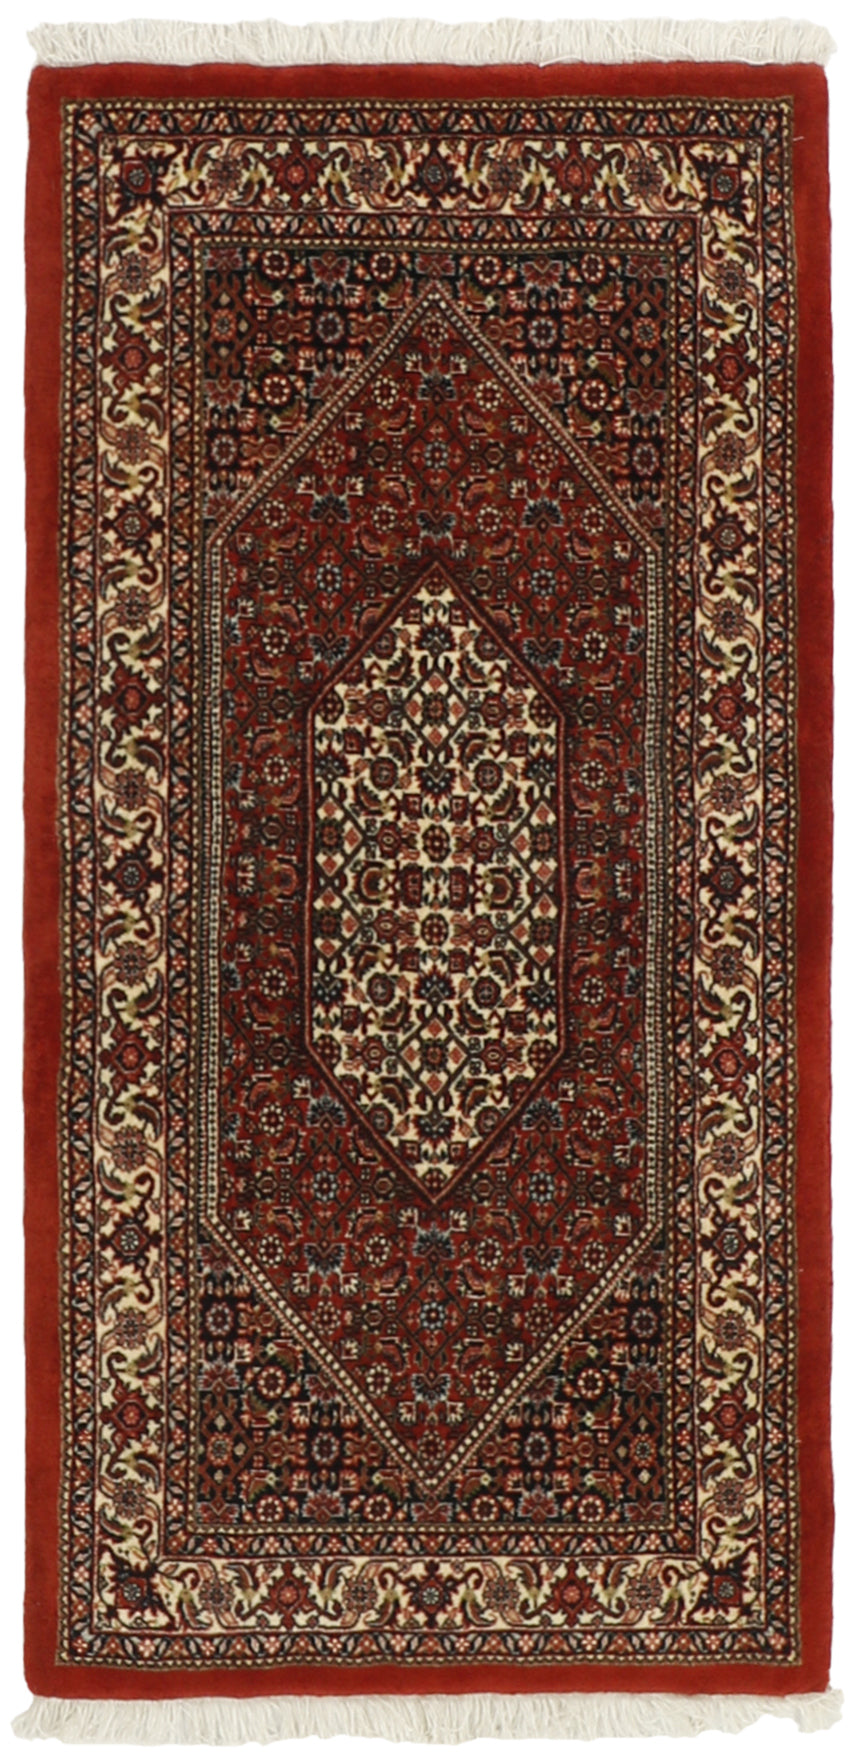 Red and cream persian rug with traditional floral design